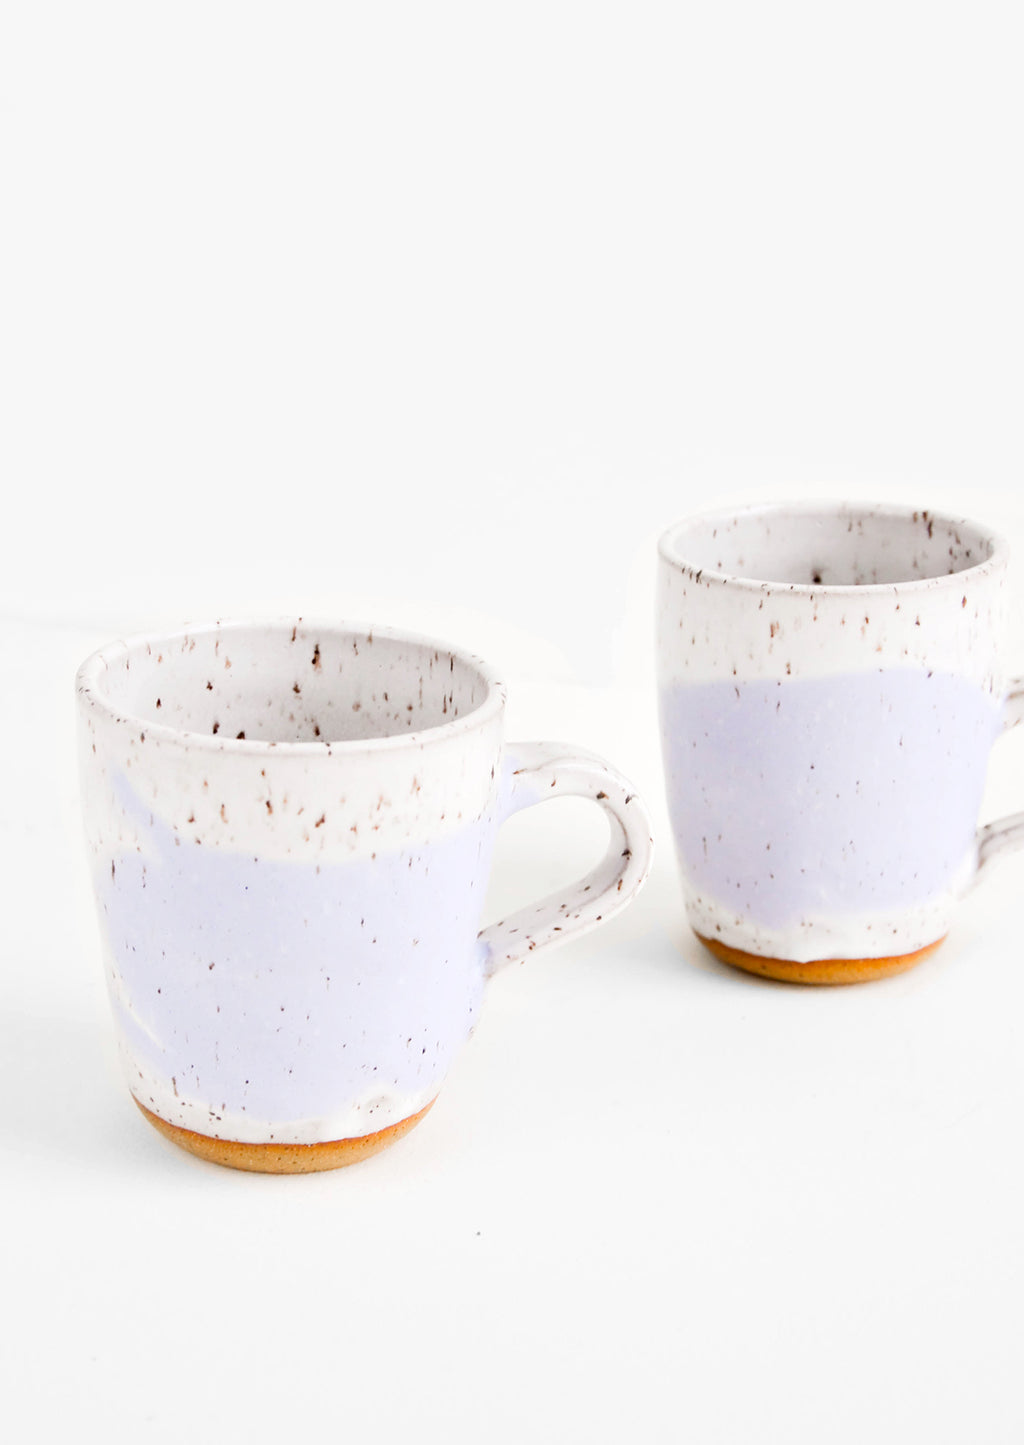 White / Wisteria: Two ceramic mugs in white and purple with brown speckles.